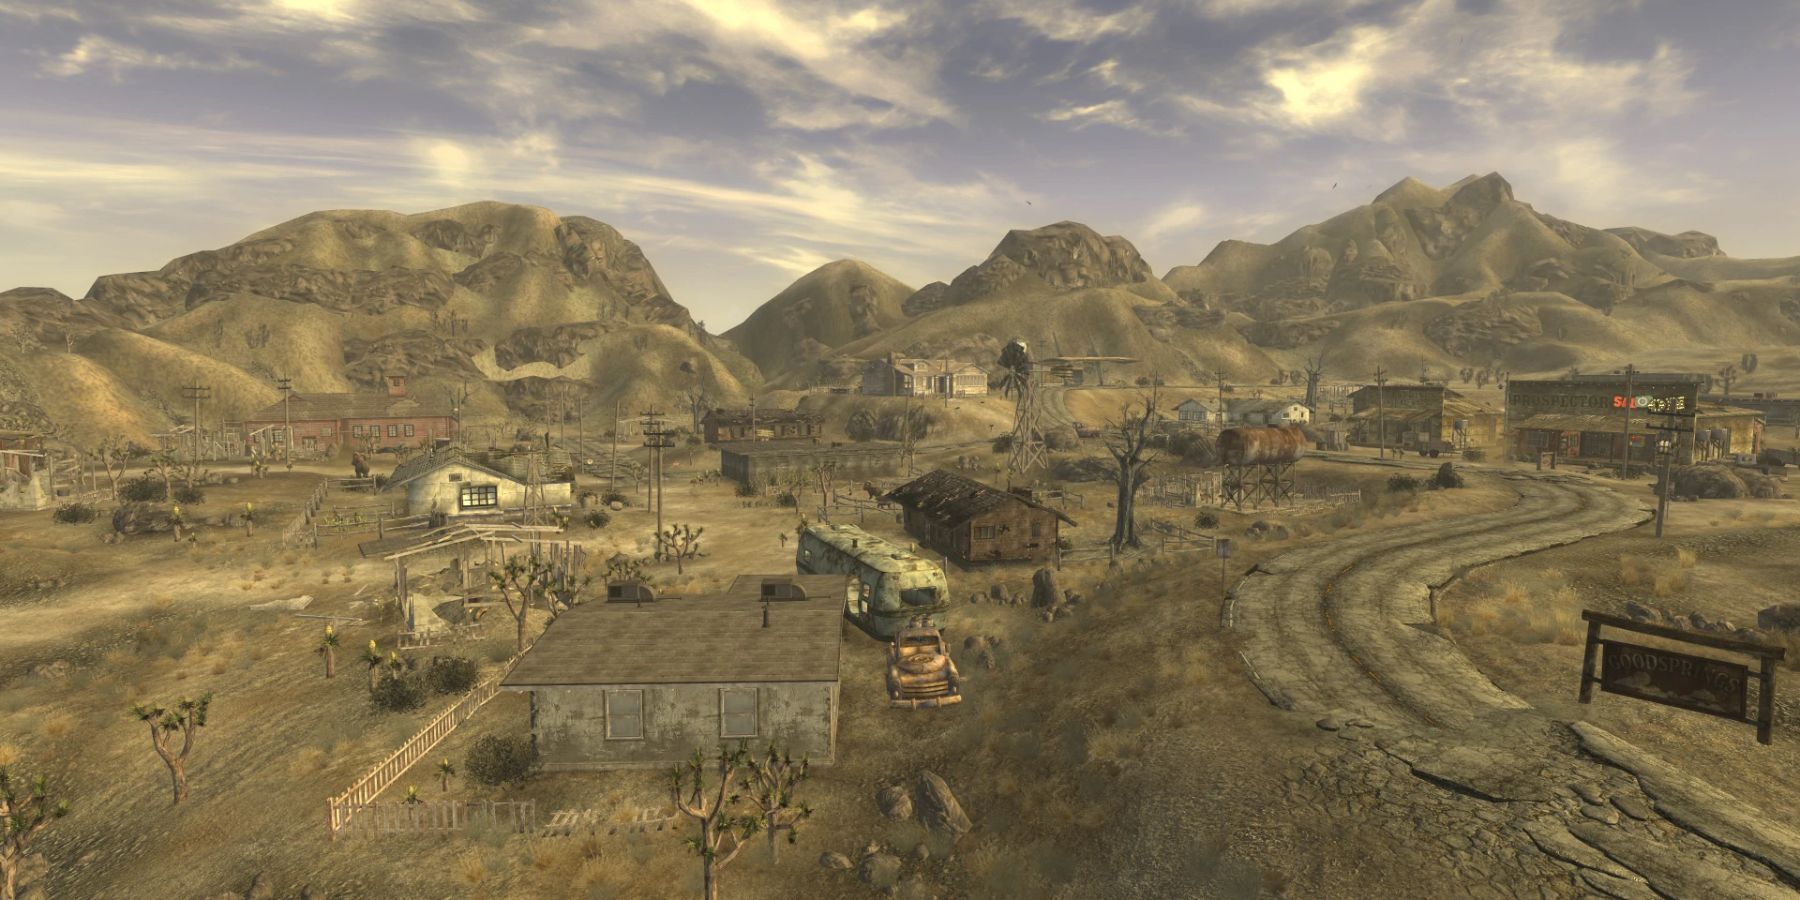 The amount of freedom afforded players when it comes to Goodsprings makes it an achievement in RPG tutorials.